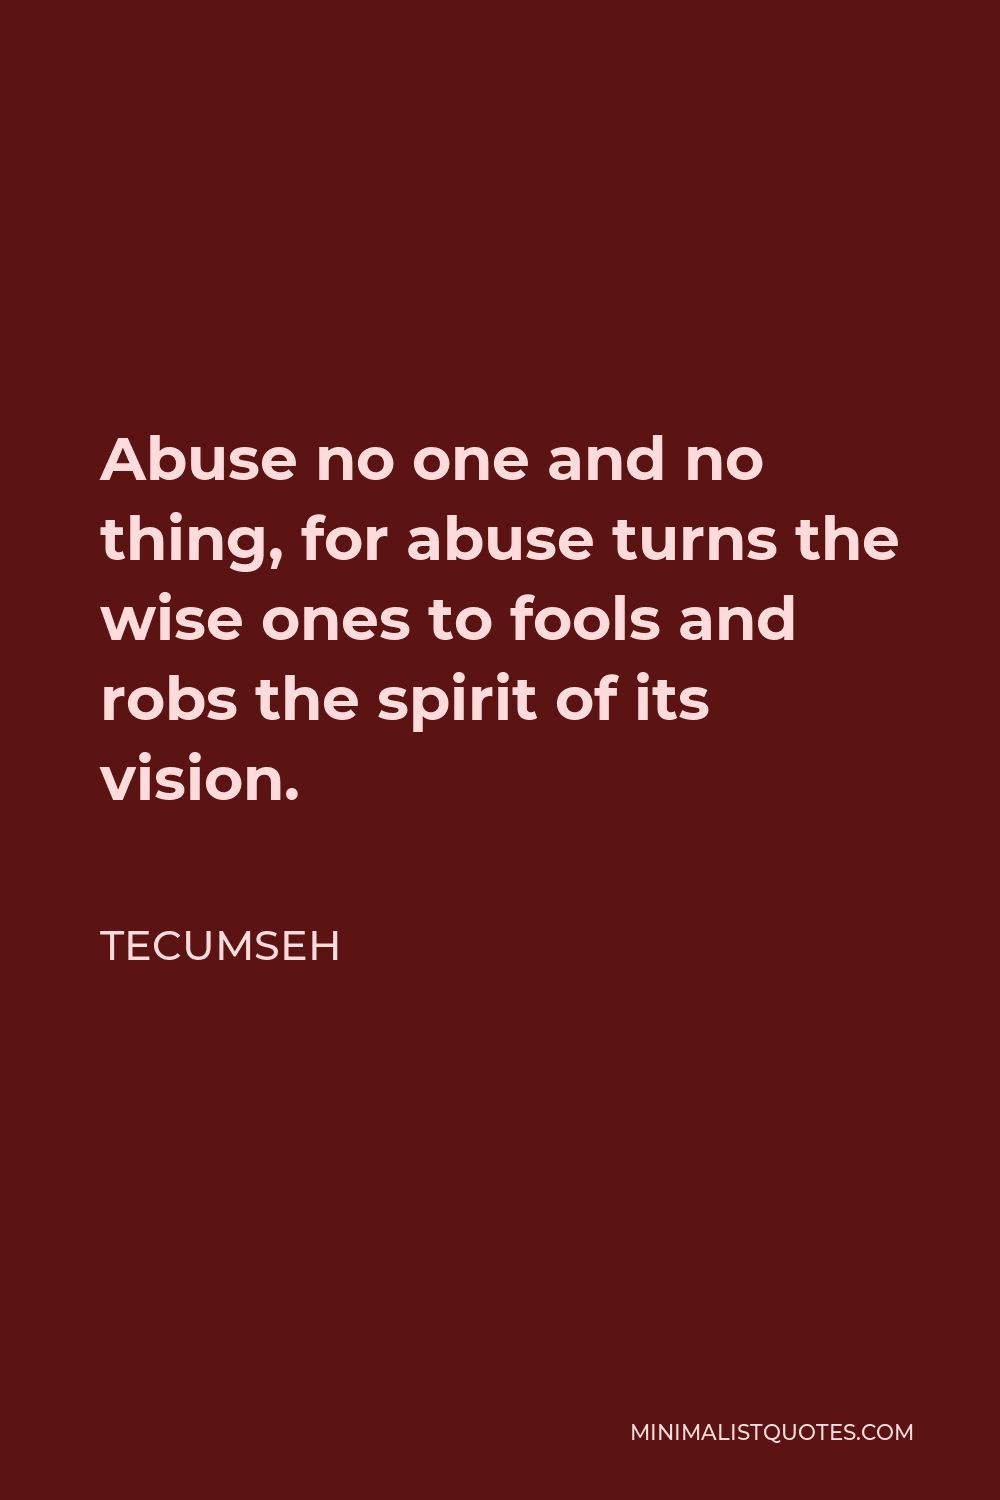 Tecumseh Quote - Abuse no one and no thing, for abuse turns the wise ones to fools and robs the spirit of its vision.